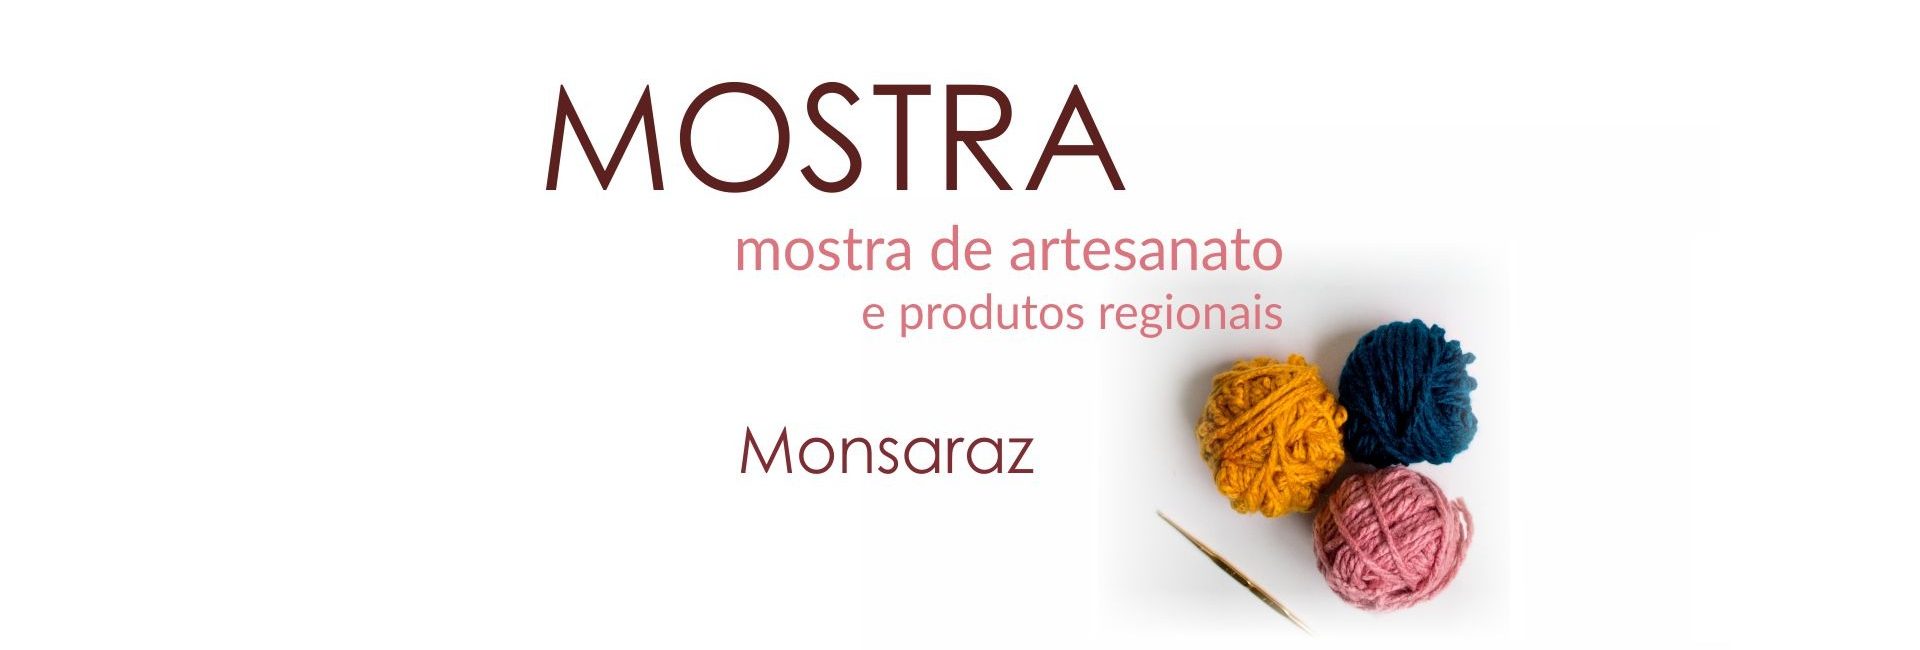 mostra-banner_1980px